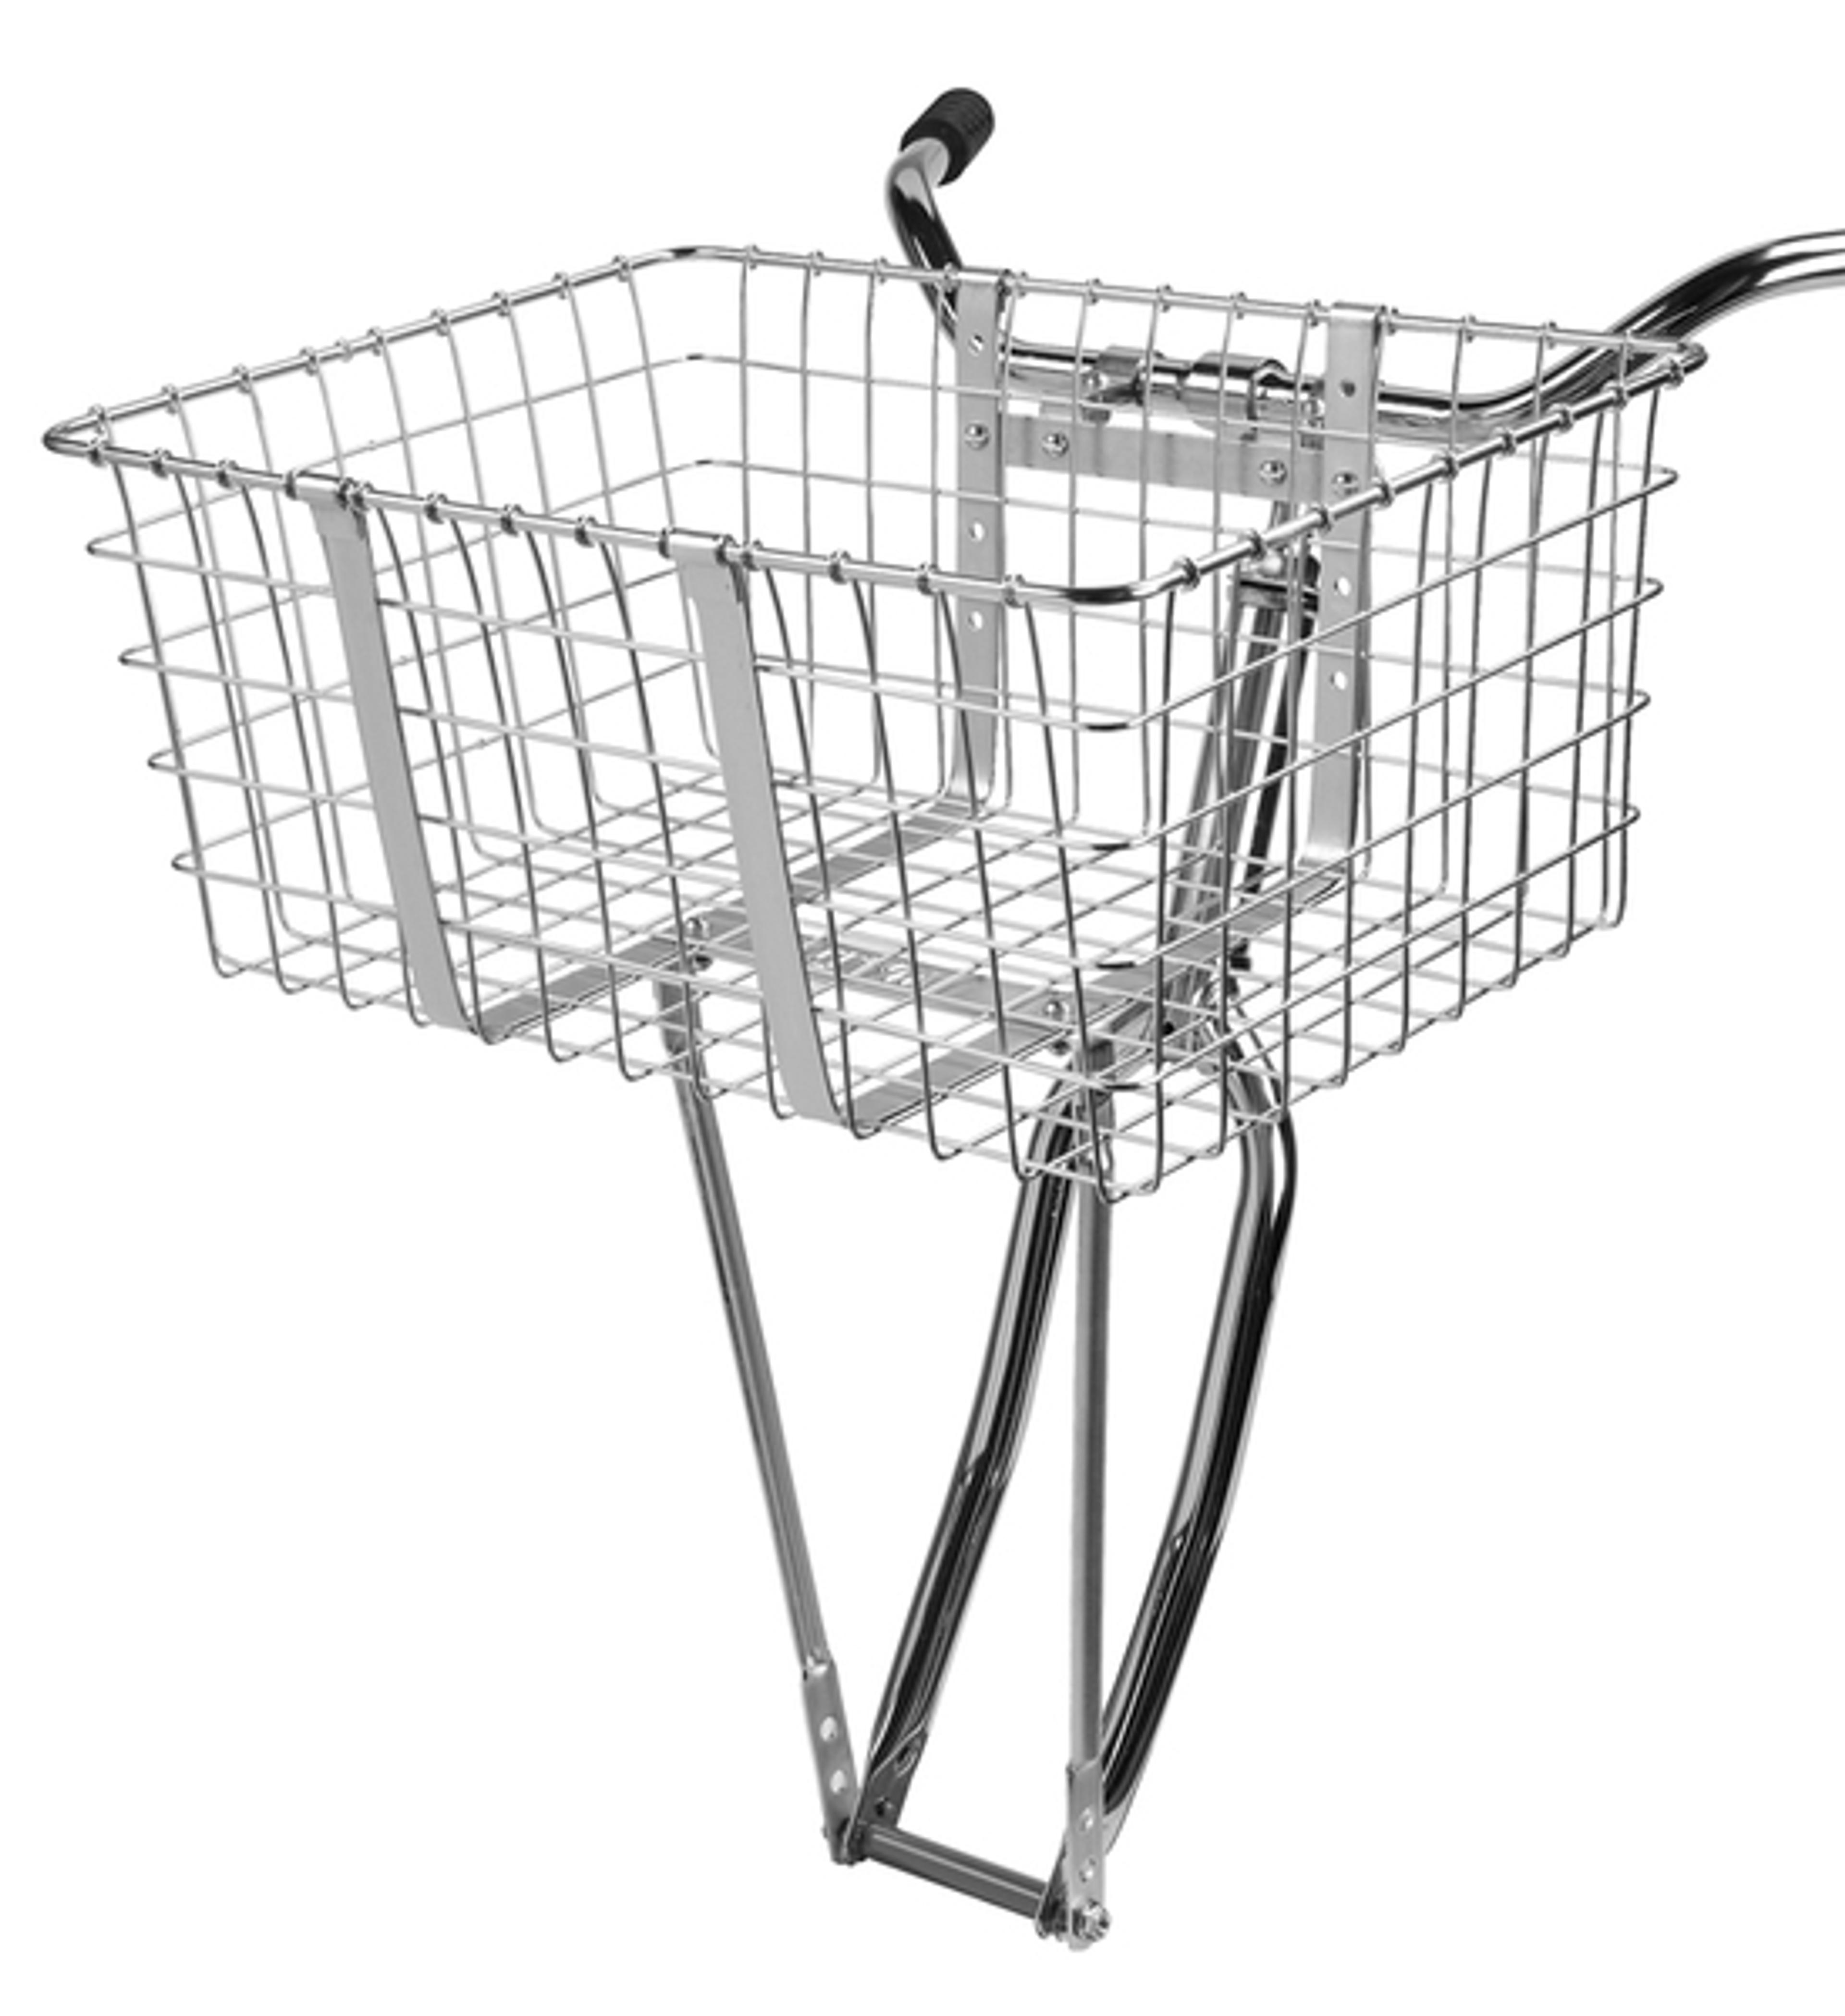 157 Giant Delivery Basket - Wald Sports